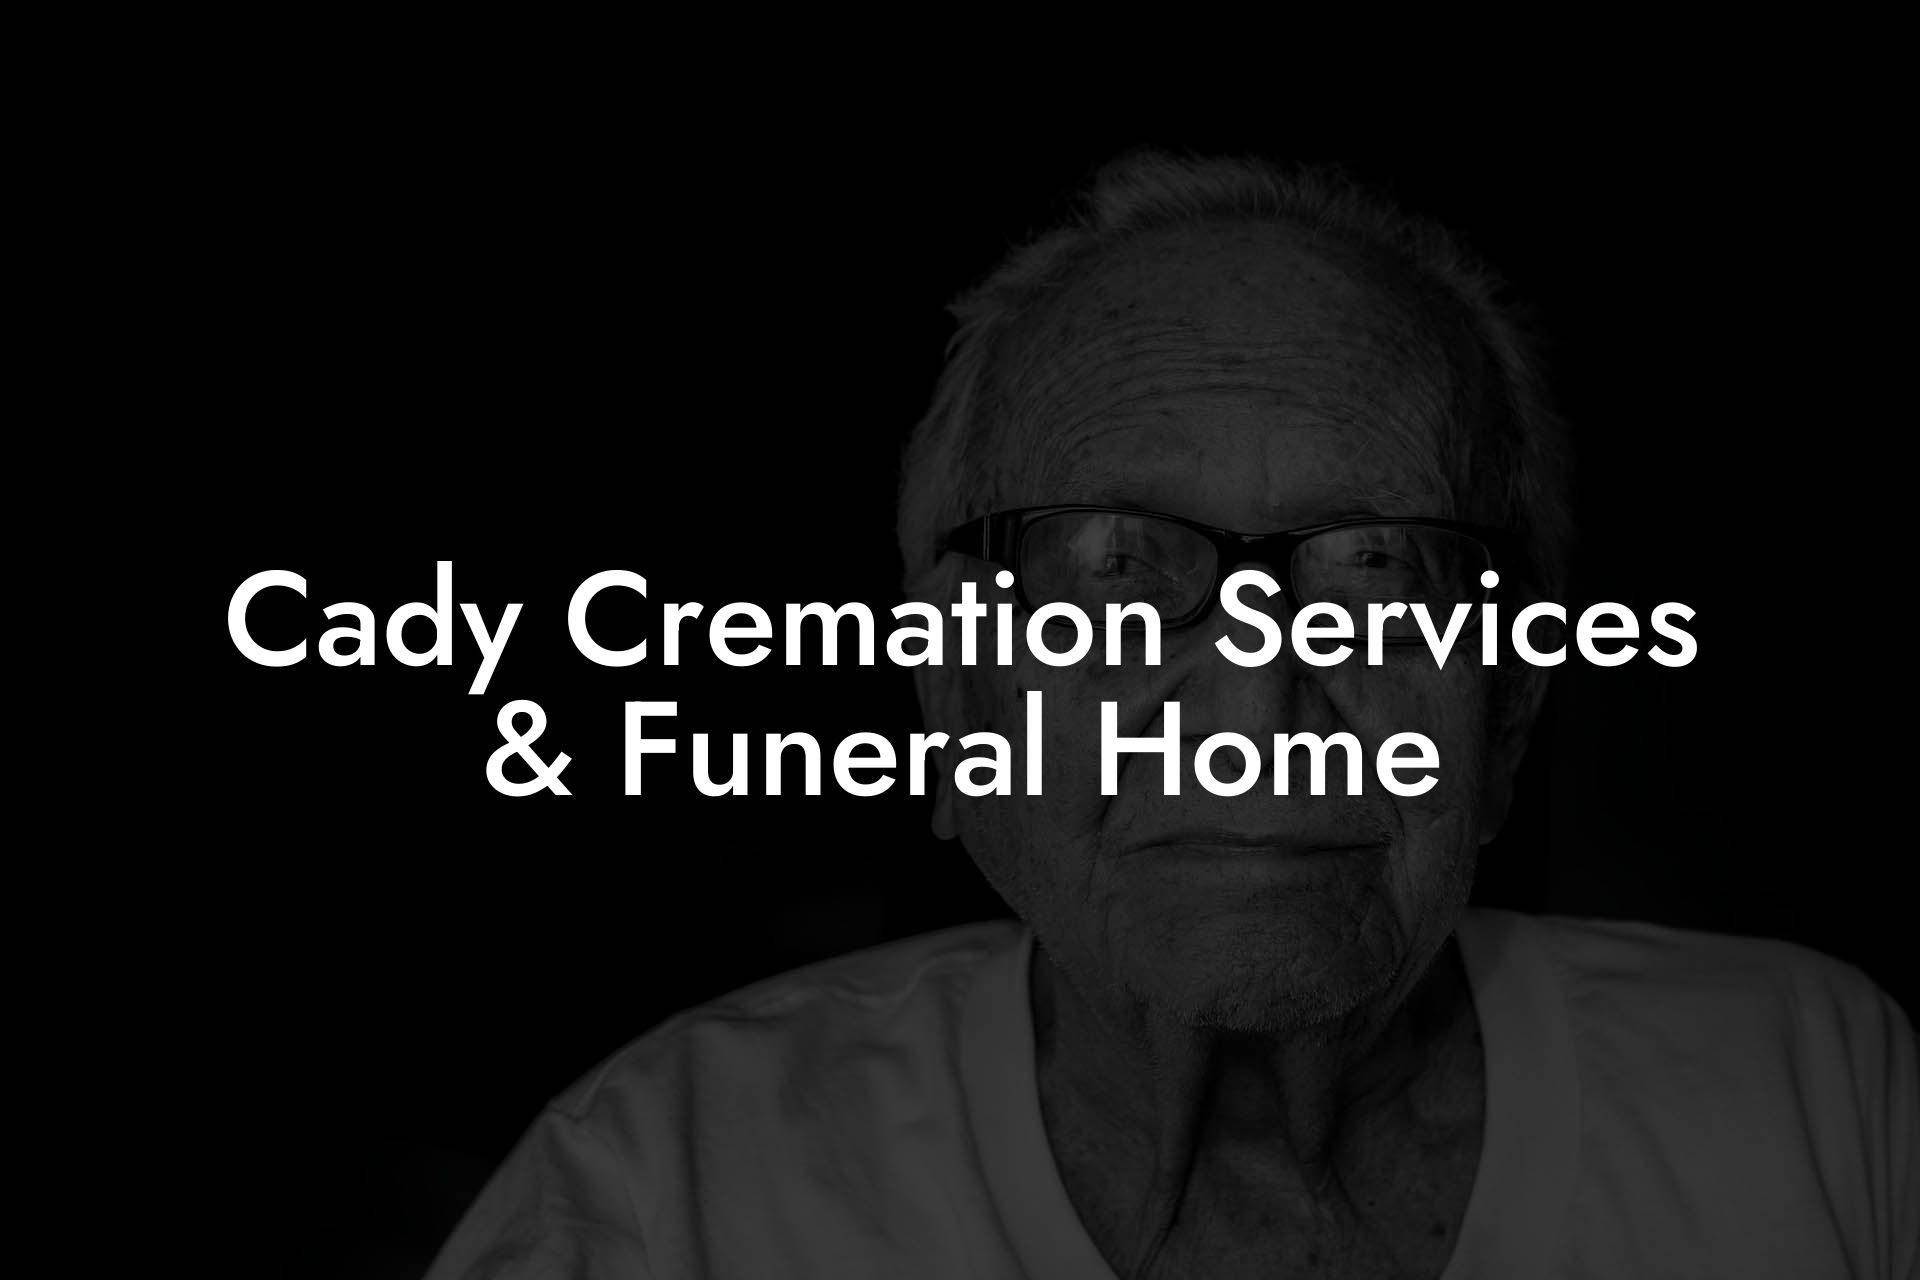 Cady Cremation Services & Funeral Home